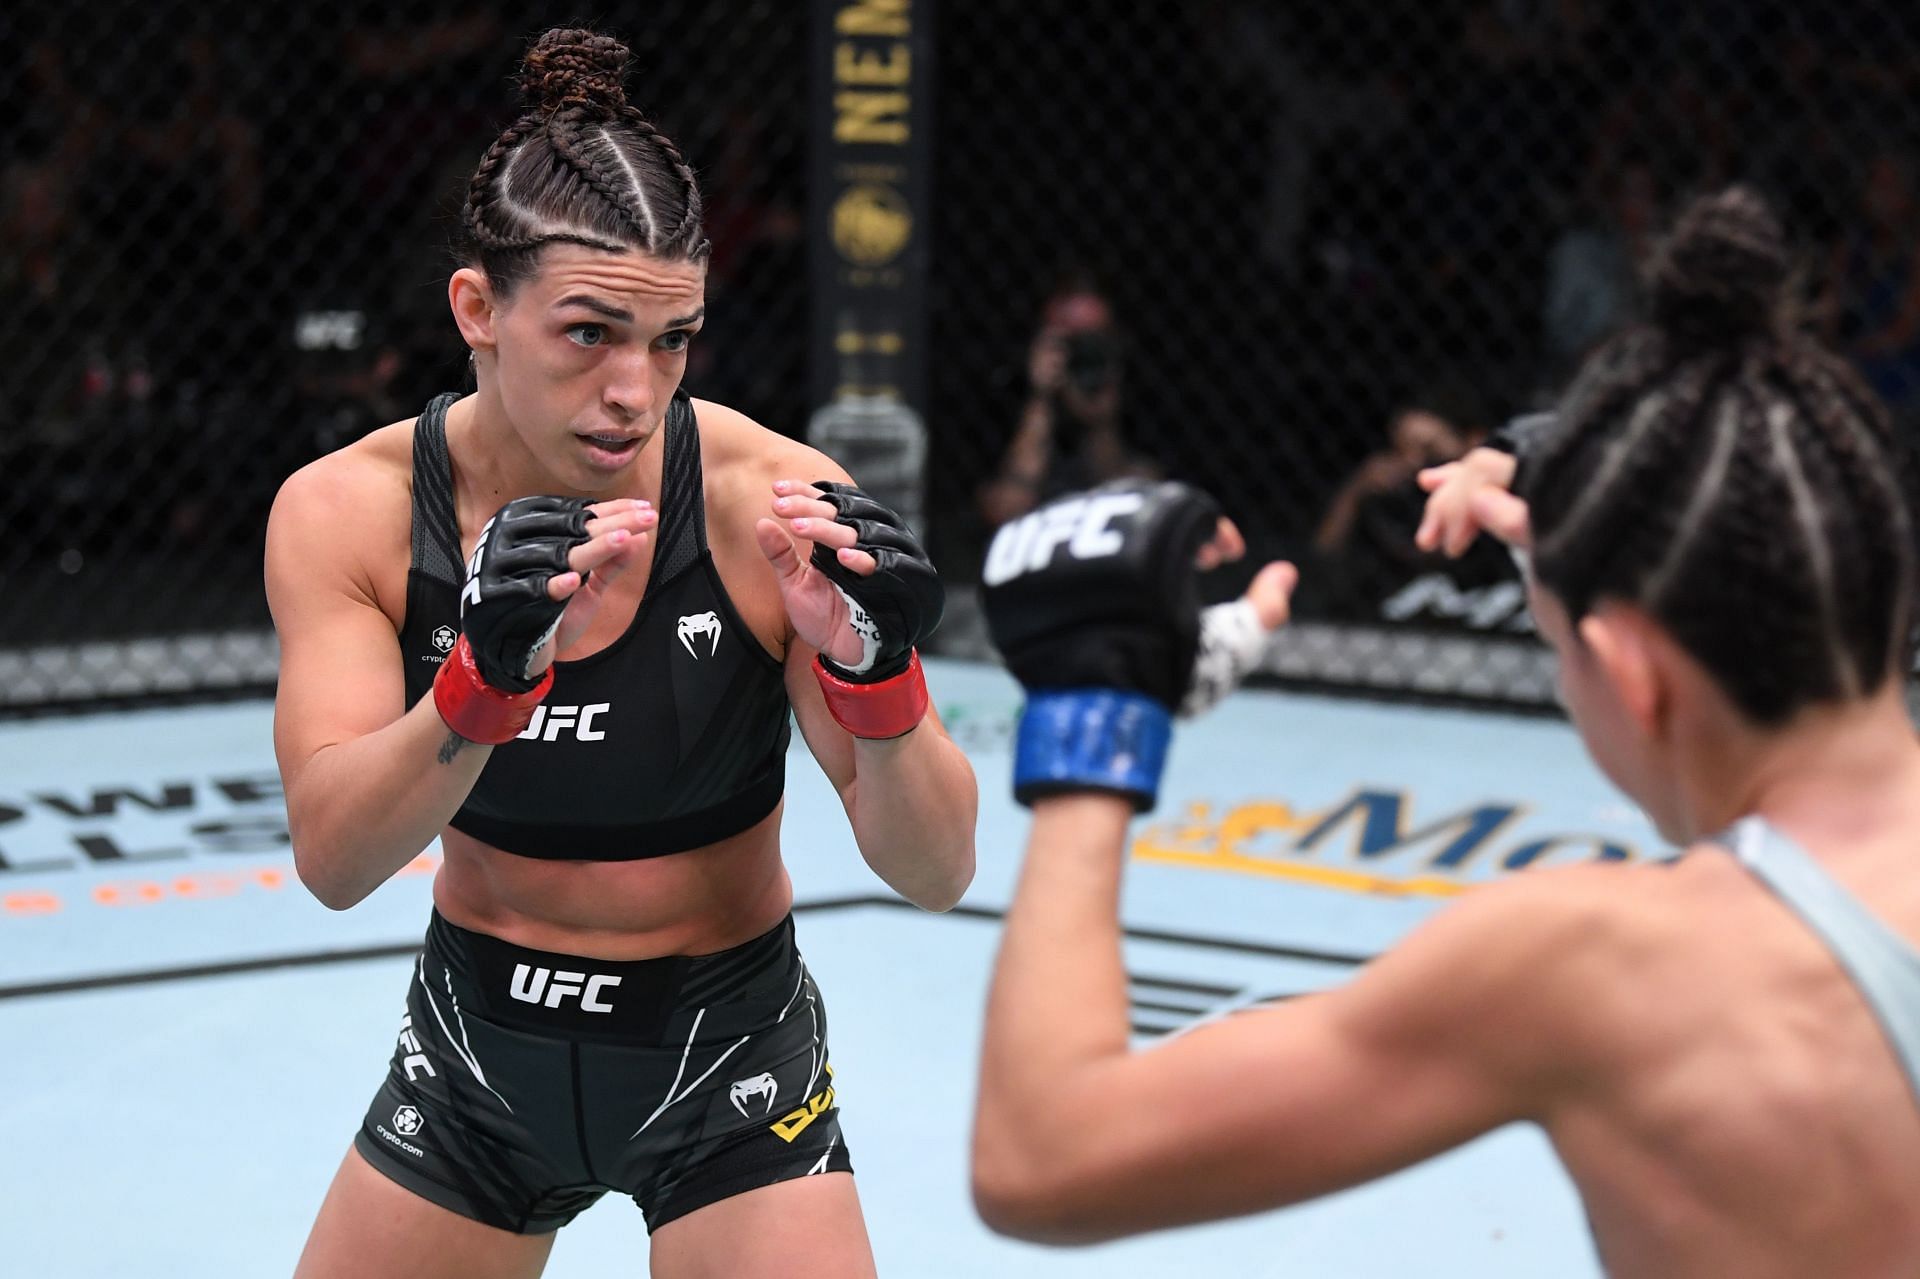 Mackenzie Dern&#039;s grappling skills make her a potentially intriguing strawweight title contender